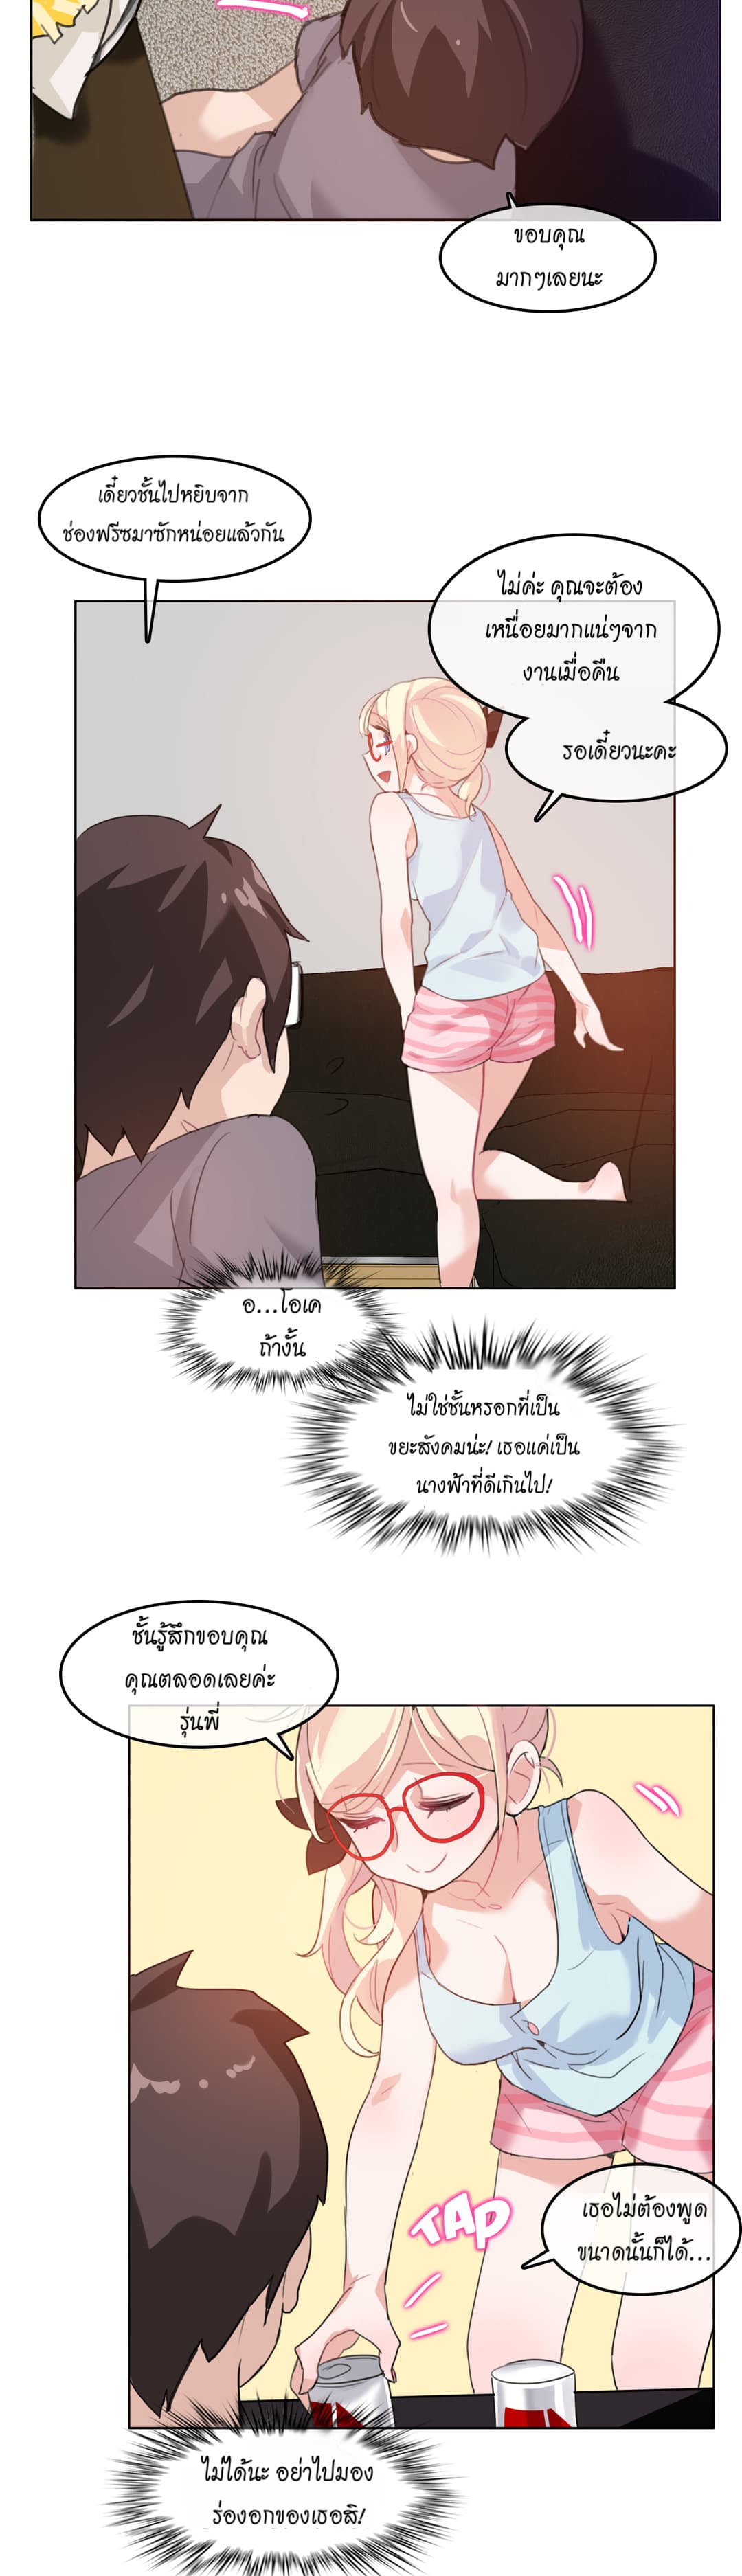 A Pervert’s Daily Life 4 (16)